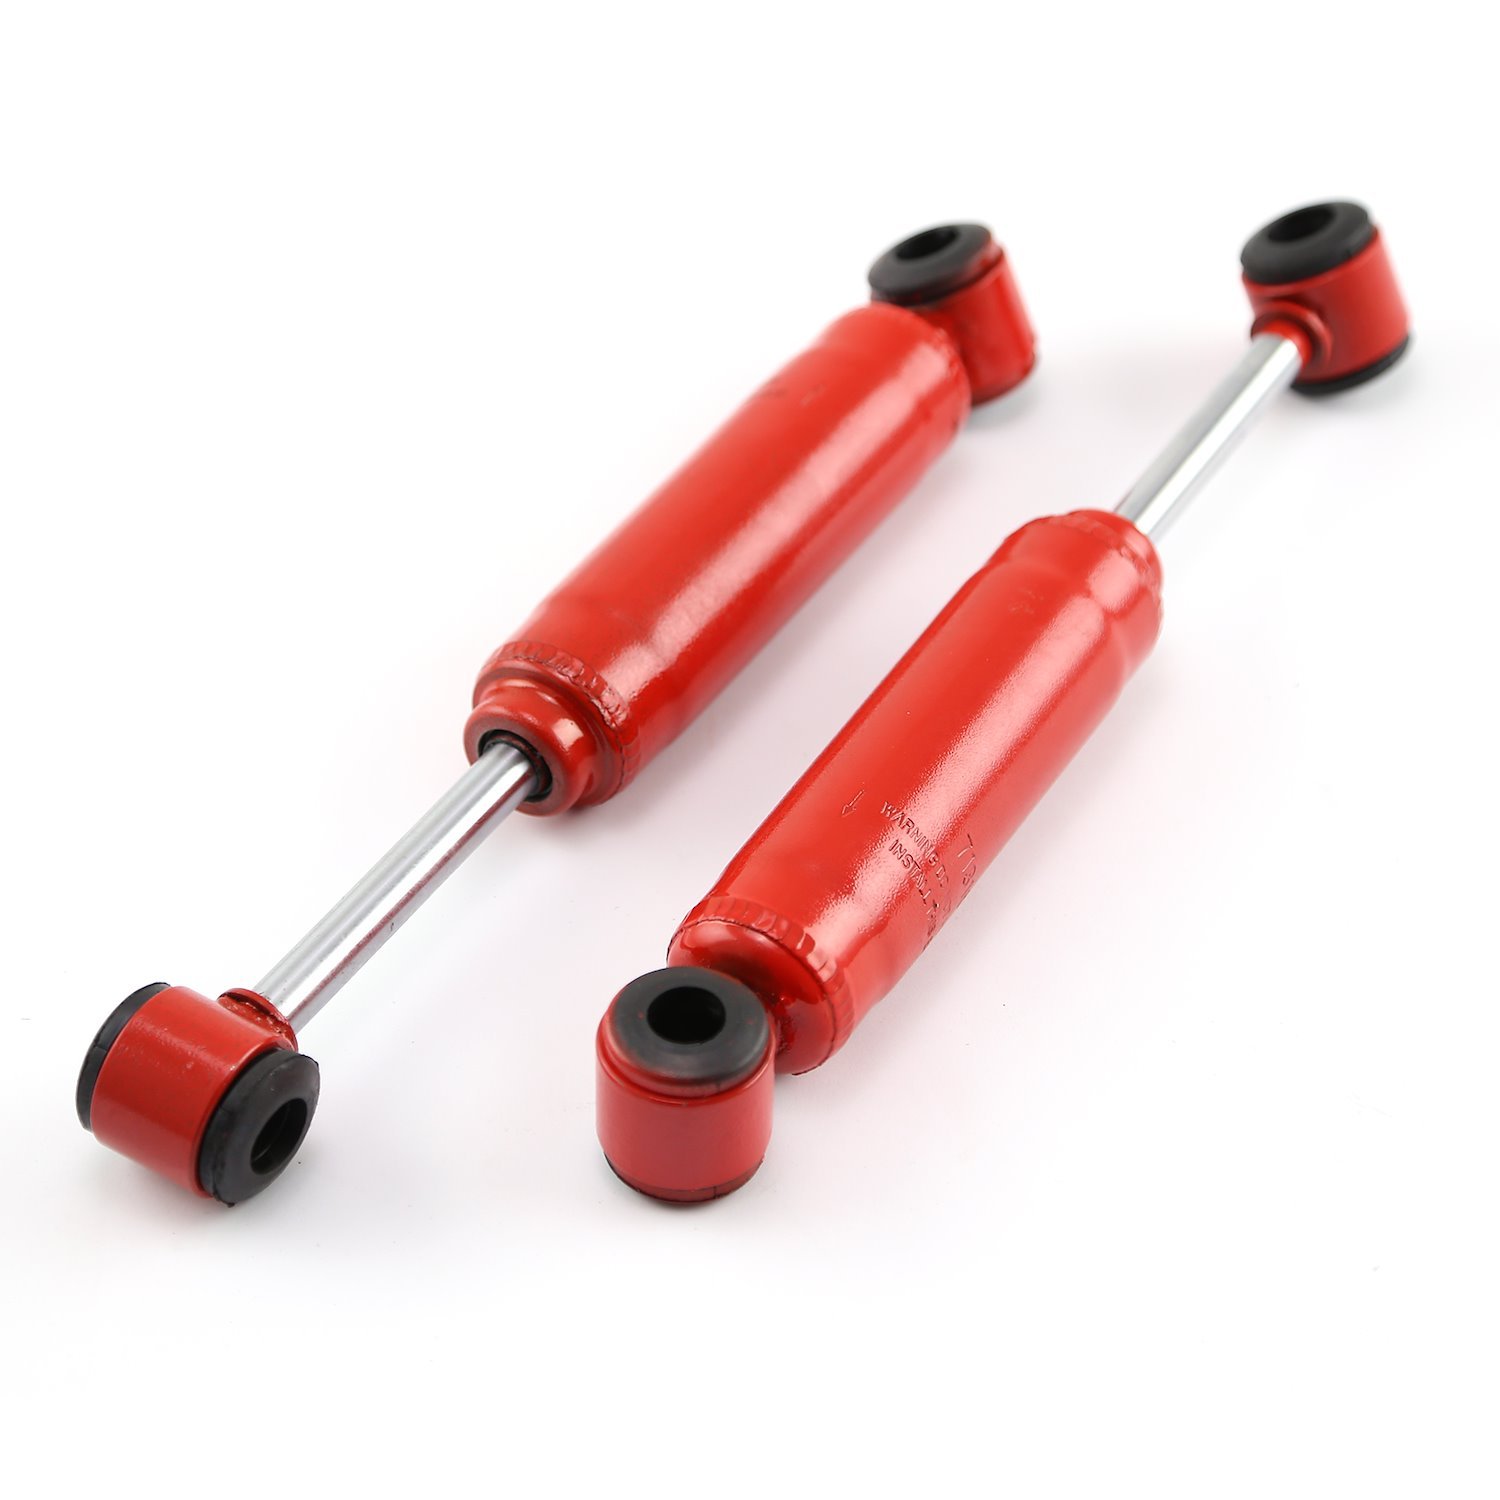 Shorty Mono Tube Shock Absorbers, 11 1/4 in. Extended Length, 7 7/8 in. Collapsed Length - Red